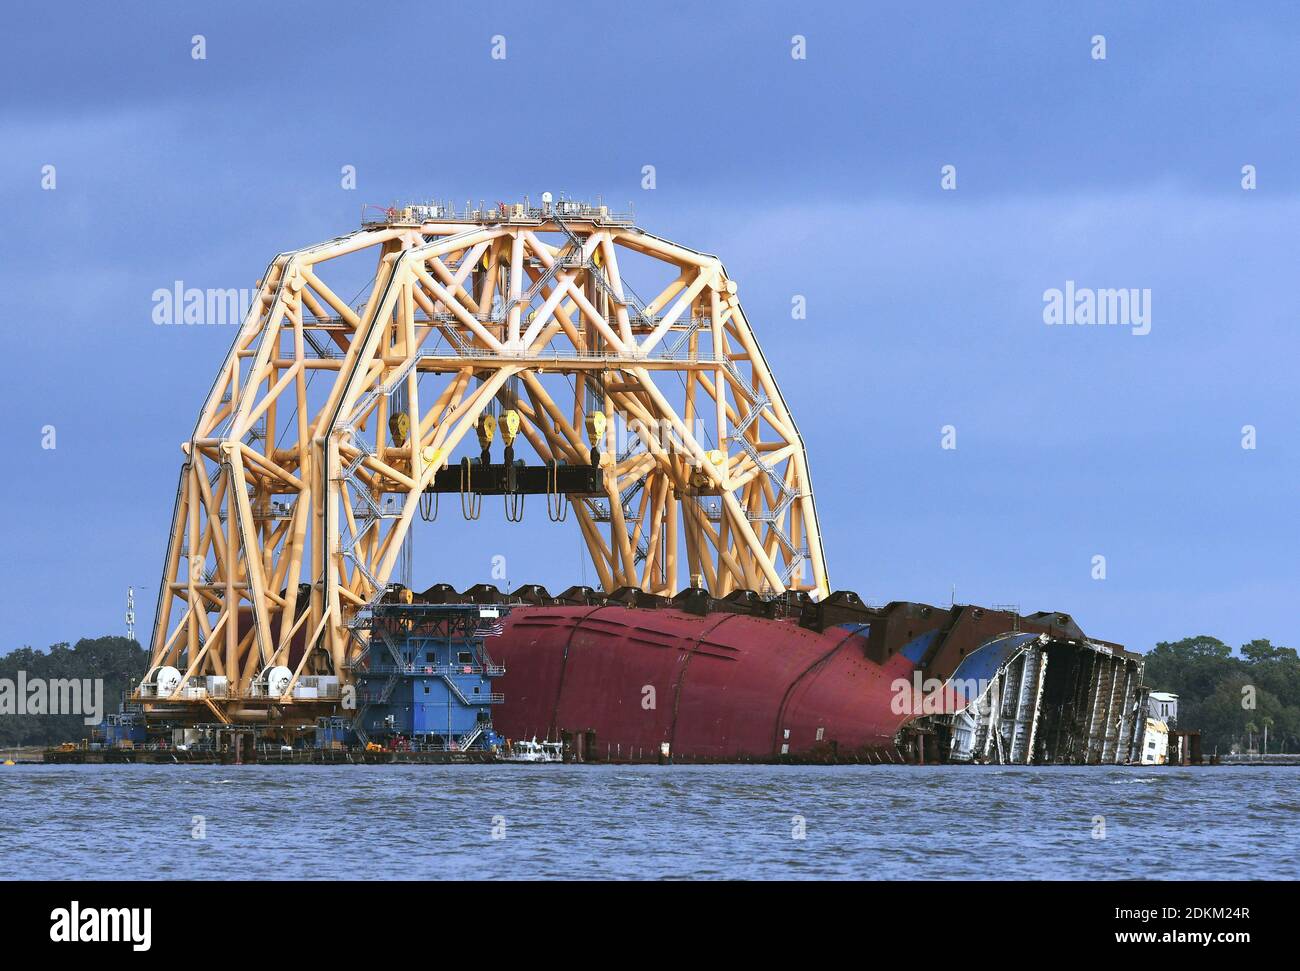 Georgia, USA. 14th Dec, 2020. December 14, 2020 - Jekyll Island, Georgia, United States - The Golden Ray cargo ship lies on its side under a  heavy-lift twin-gantry catamaran, as seen from Driftwood Beach on December 14, 2020 in Jekyll Island, Georgia. A salvage company is cutting the vessel into eight segments, with the bow section having been cut and removed by a barge to be scrapped. The vehicle carrier, loaded with 4200 new cars, capsized in St. Simons Island Sound on September 8, 2019 as it was leaving the Port of Brunswick, Georgia. (Paul Hennessy/Alamy) Credit: Paul Hennessy/Alamy Live  Stock Photo